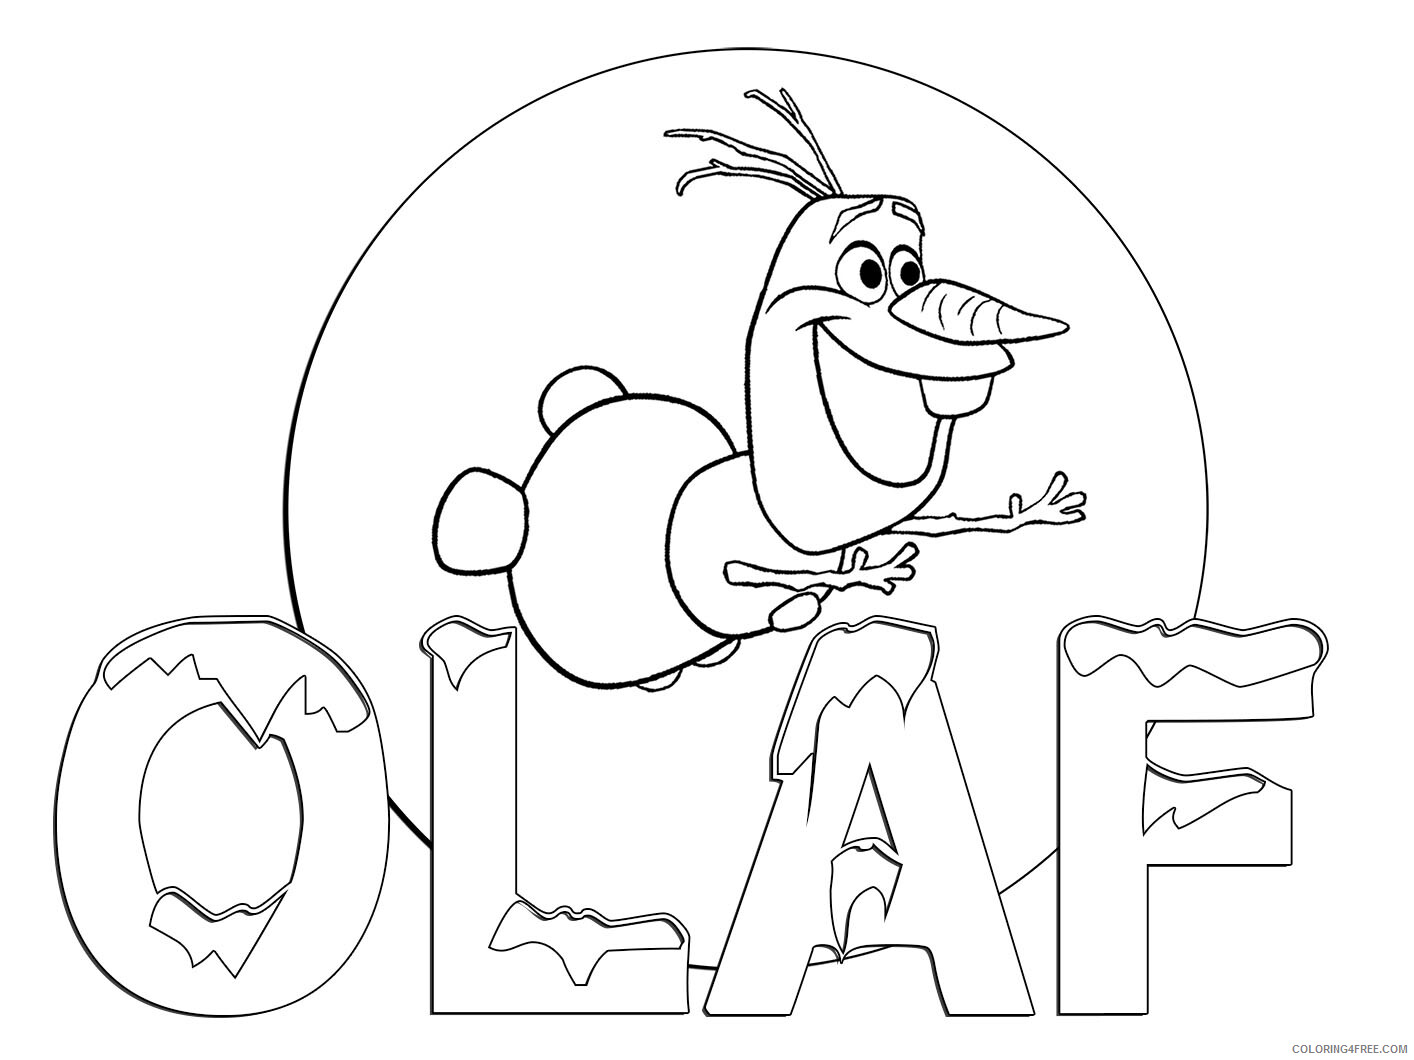 Olaf Coloring Pages TV Film olaf Printable 2020 05639 Coloring4free